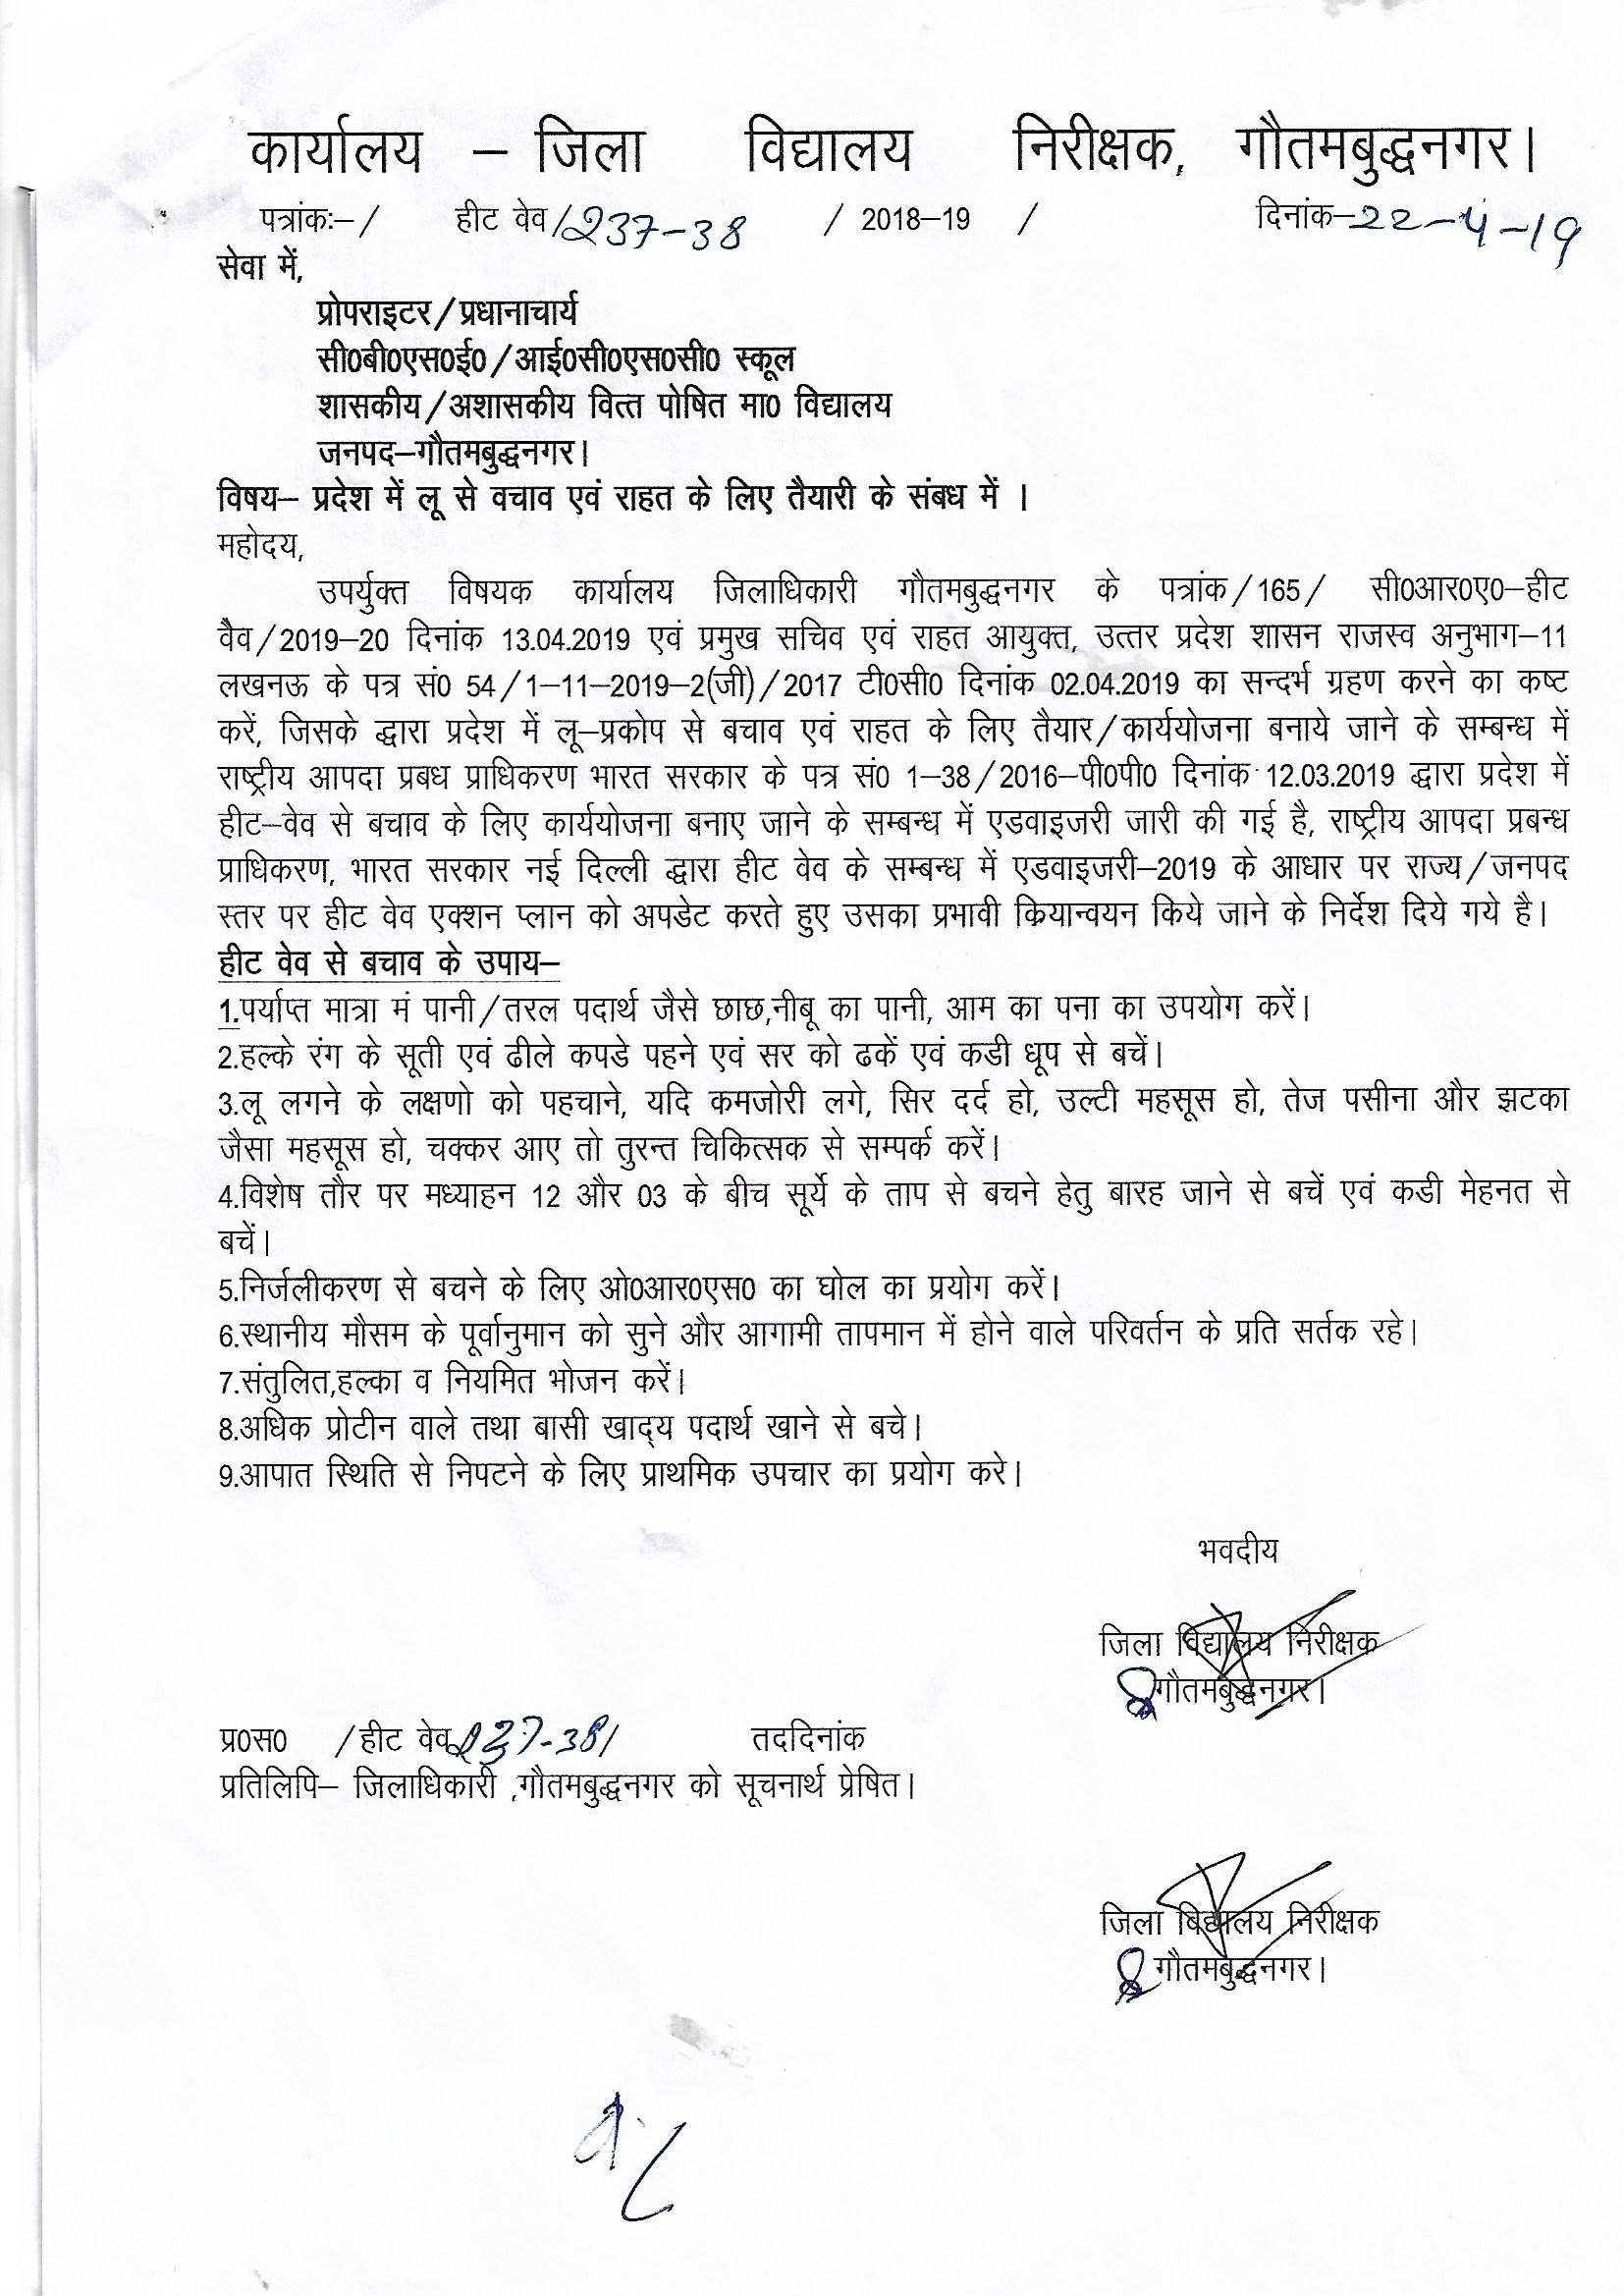 Circular for Preparation to Prevent from Heat wave by DIOS, Gautam Buddh Nagar